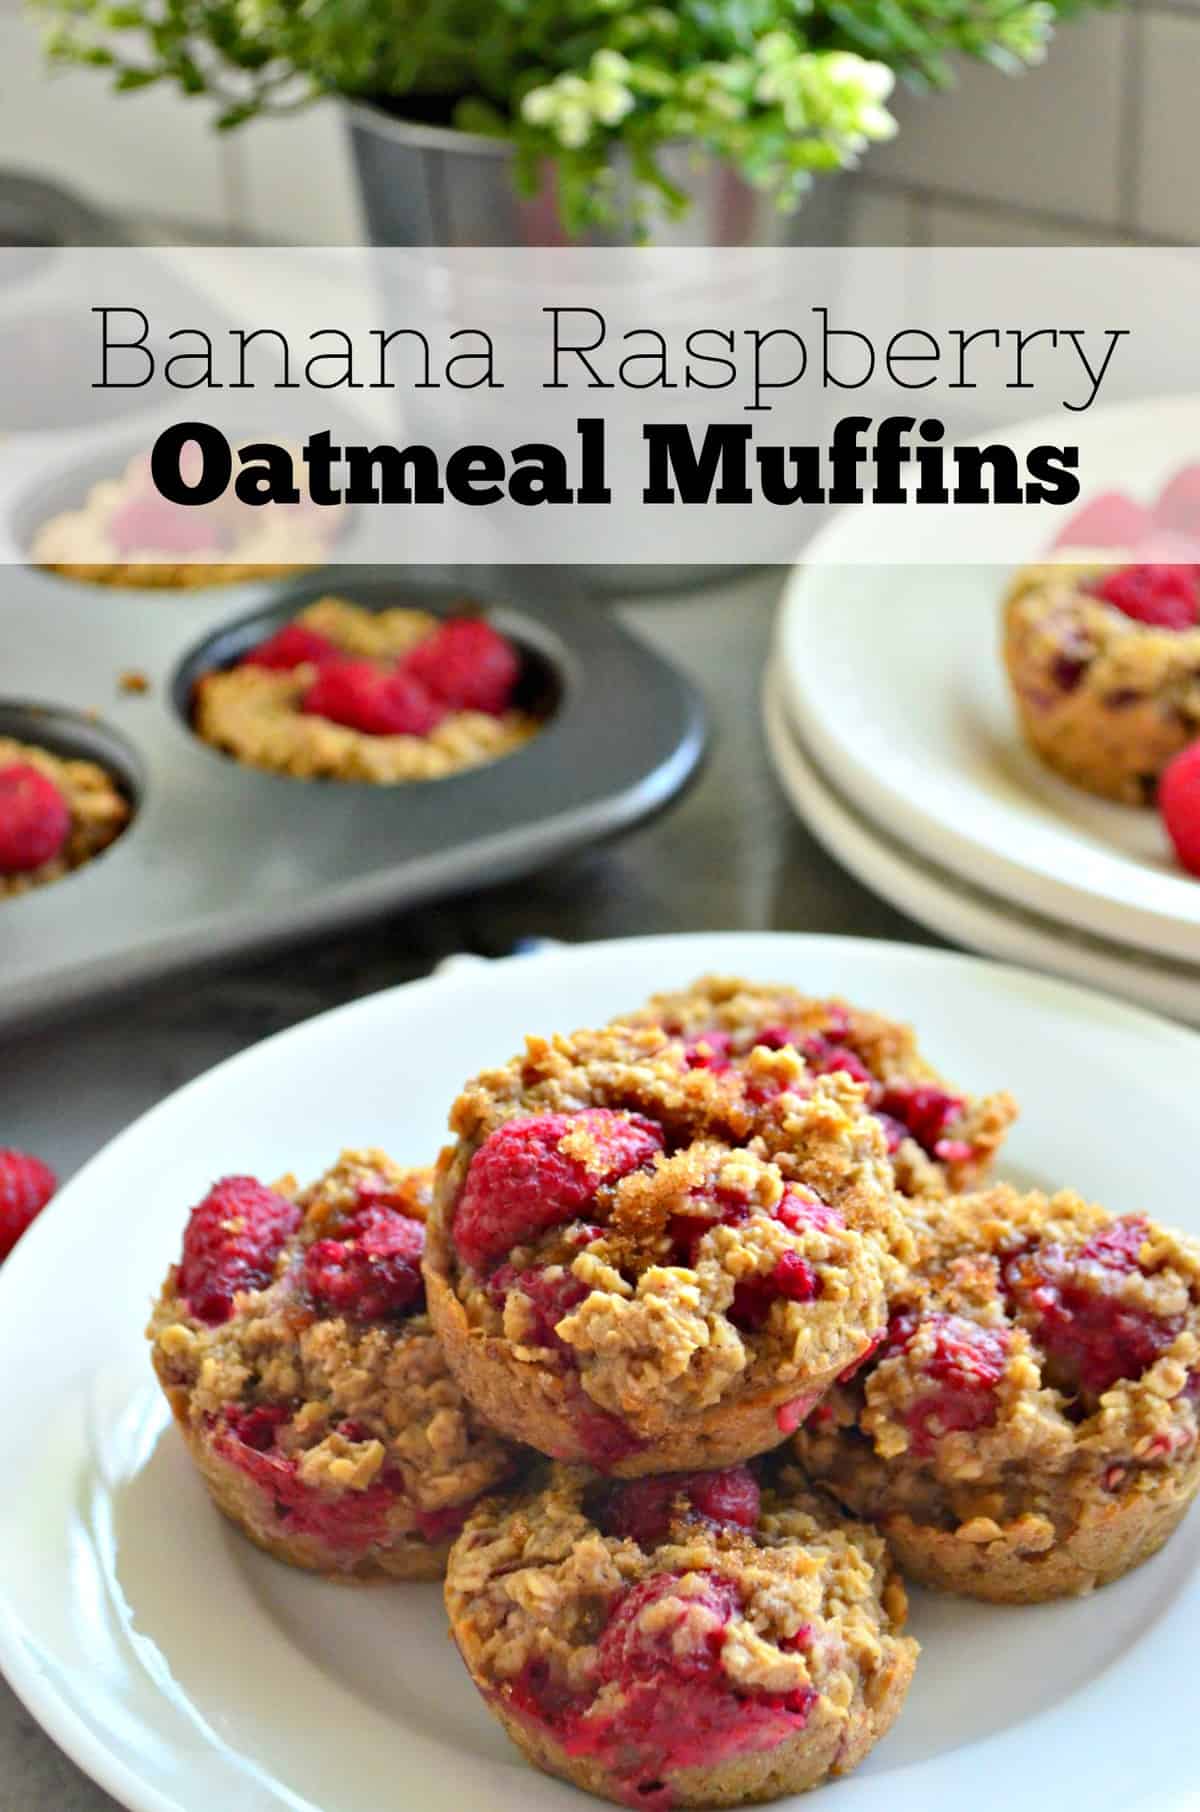 Banana Raspberry Oatmeal Muffins stacked on a white plate with muffin tin in background and title text.